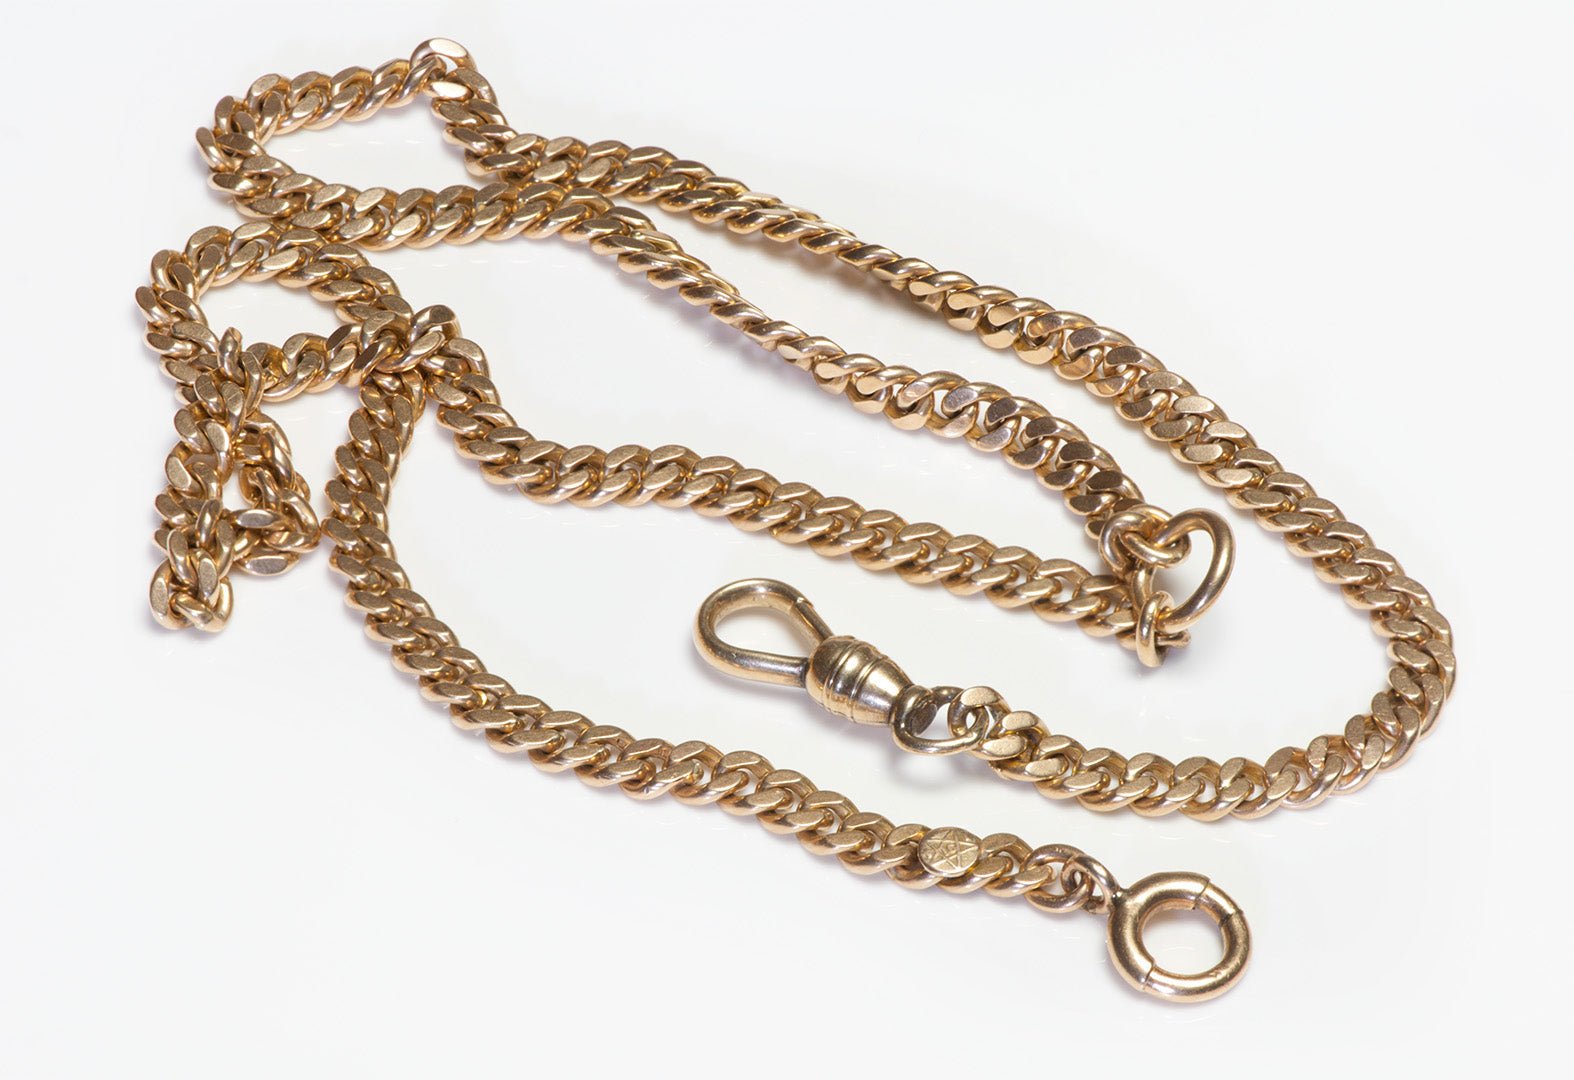 Antique Yellow Gold Pressed Link Watch Chain